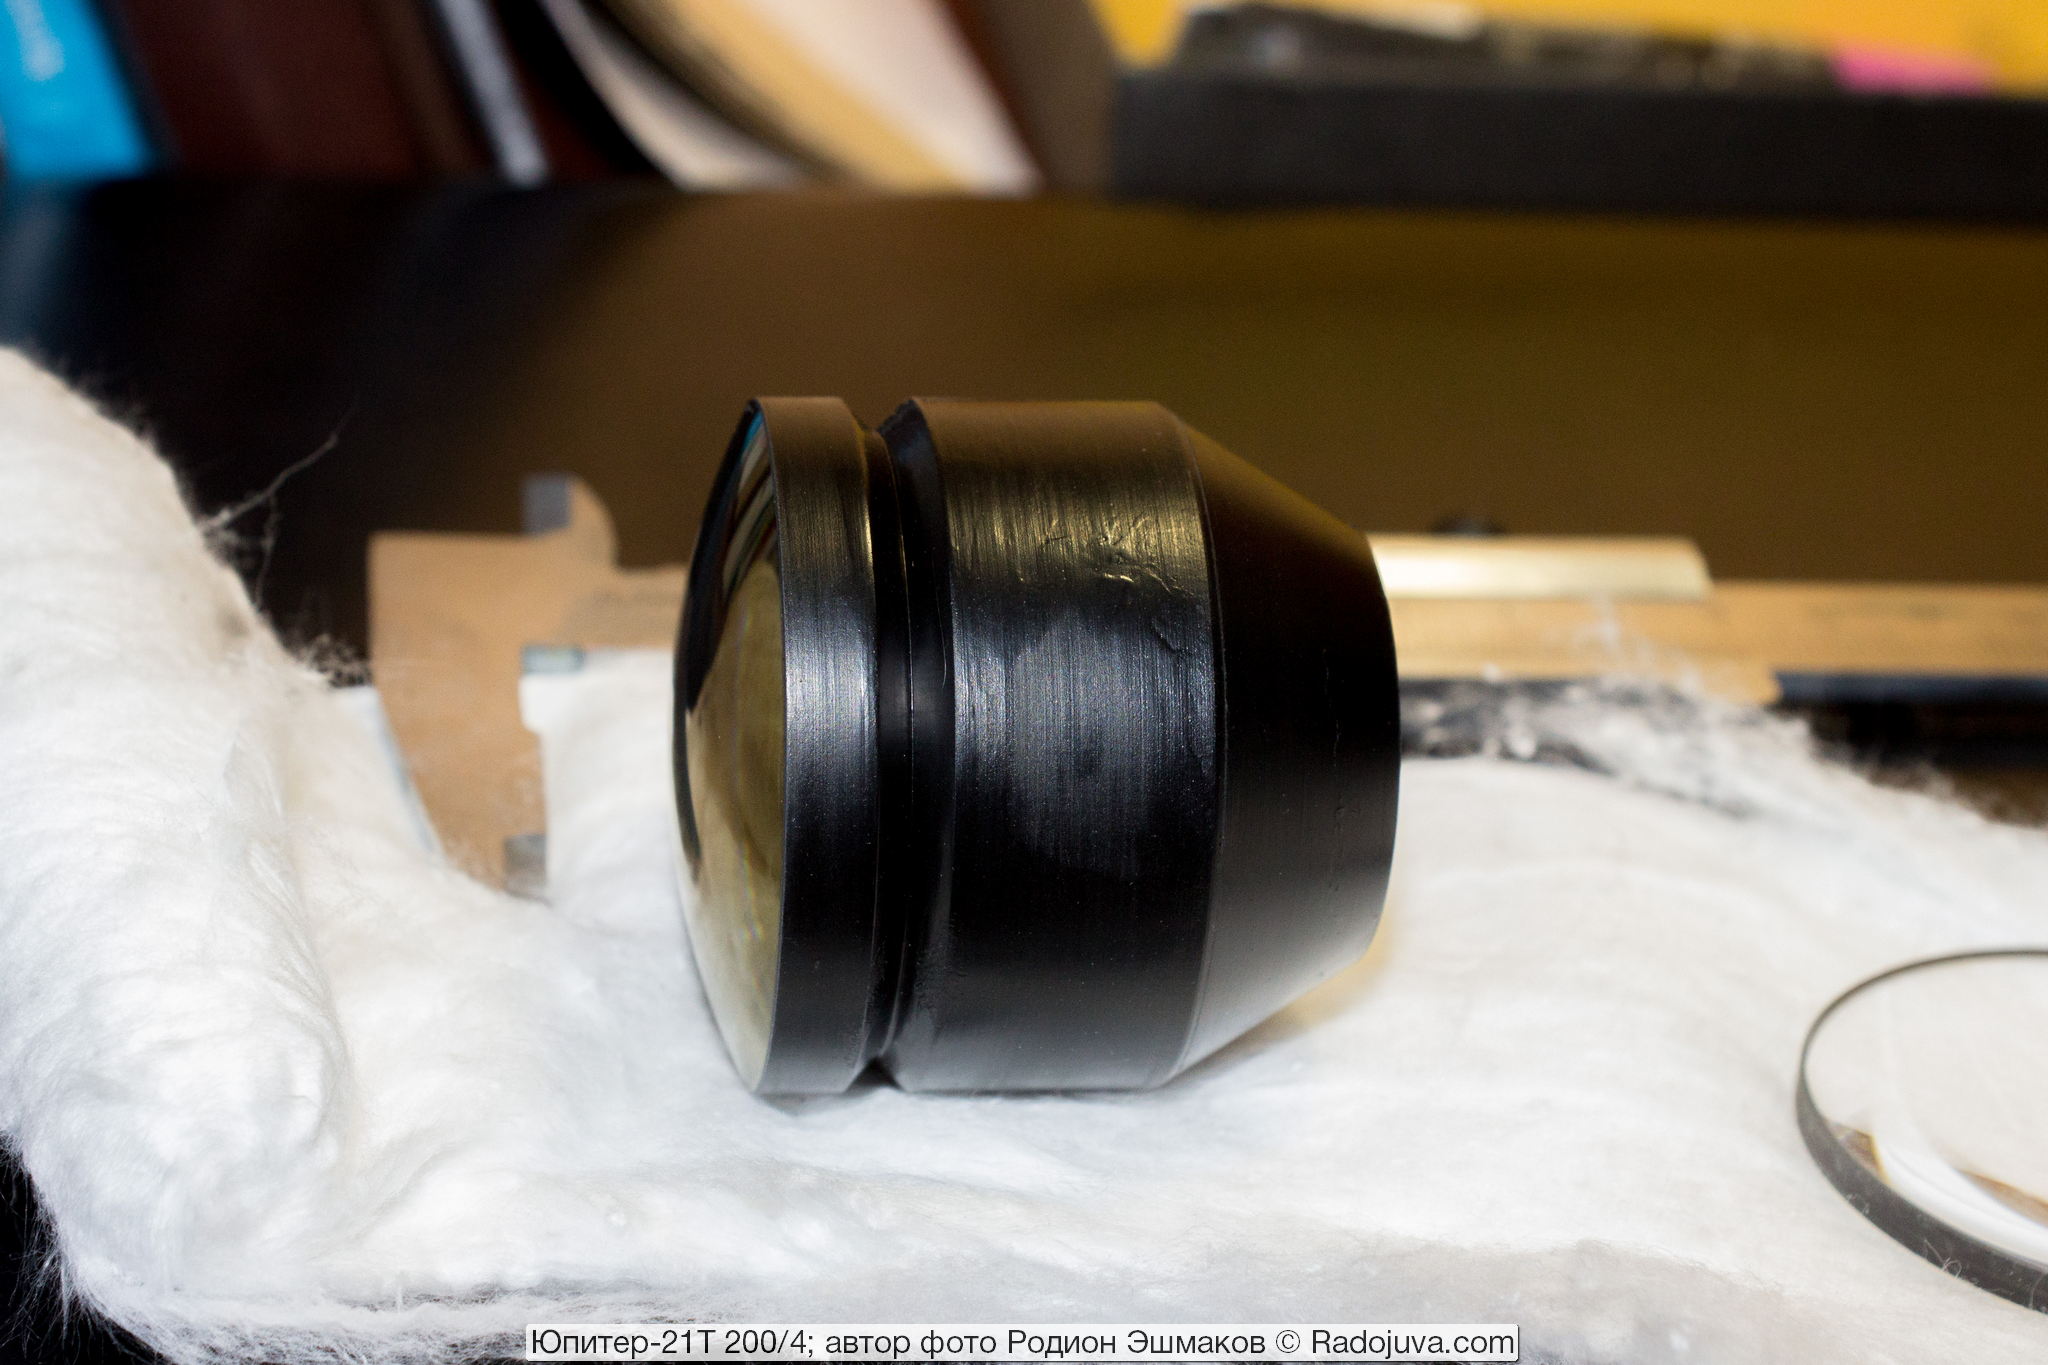 The middle component of Jupiter-21T is gluing from two lenses.